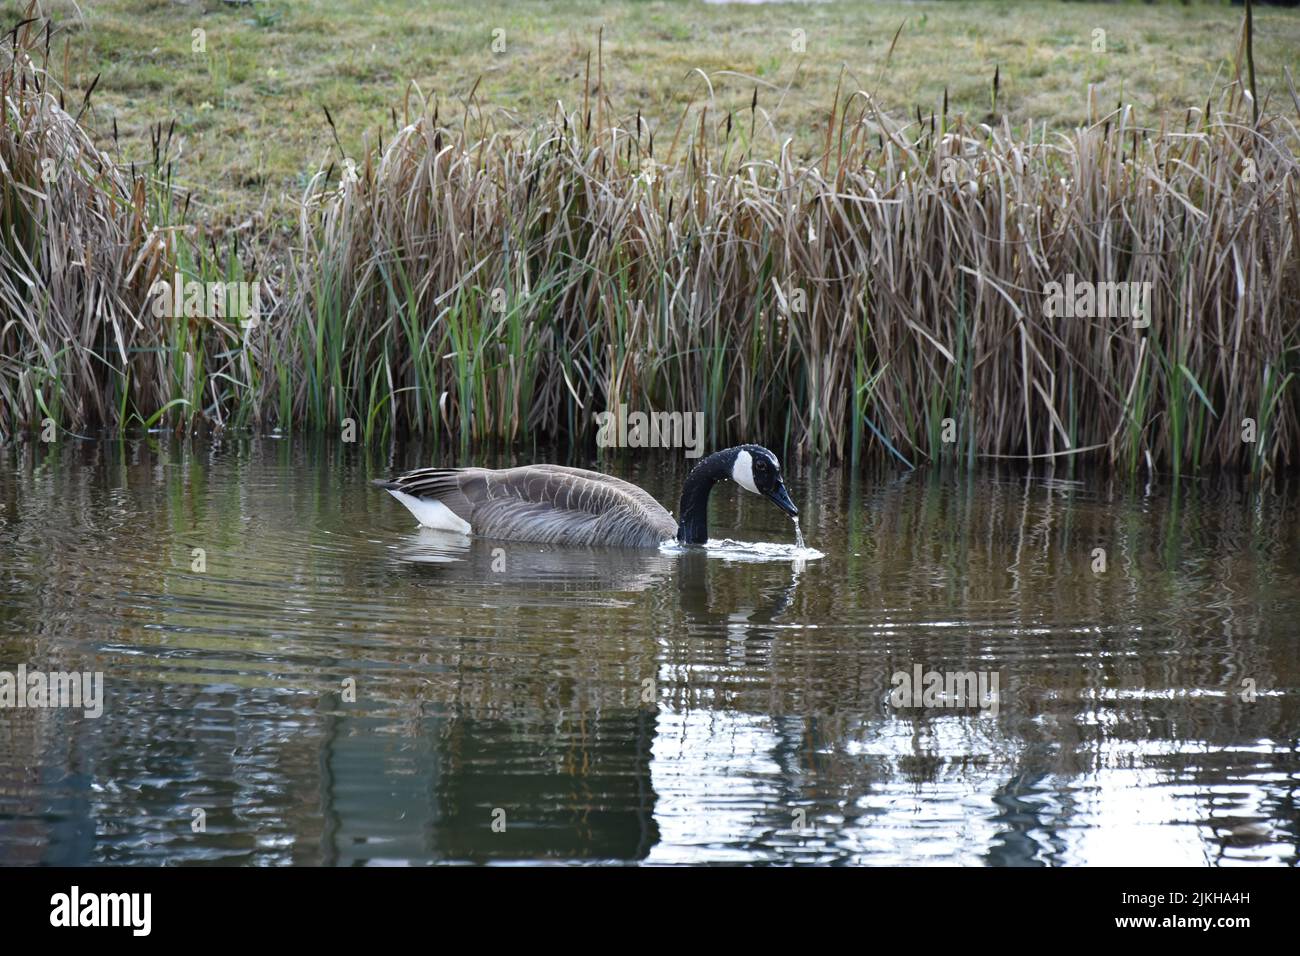 A Canada goose (Branta canadensis) wading near the reeds Stock Photo